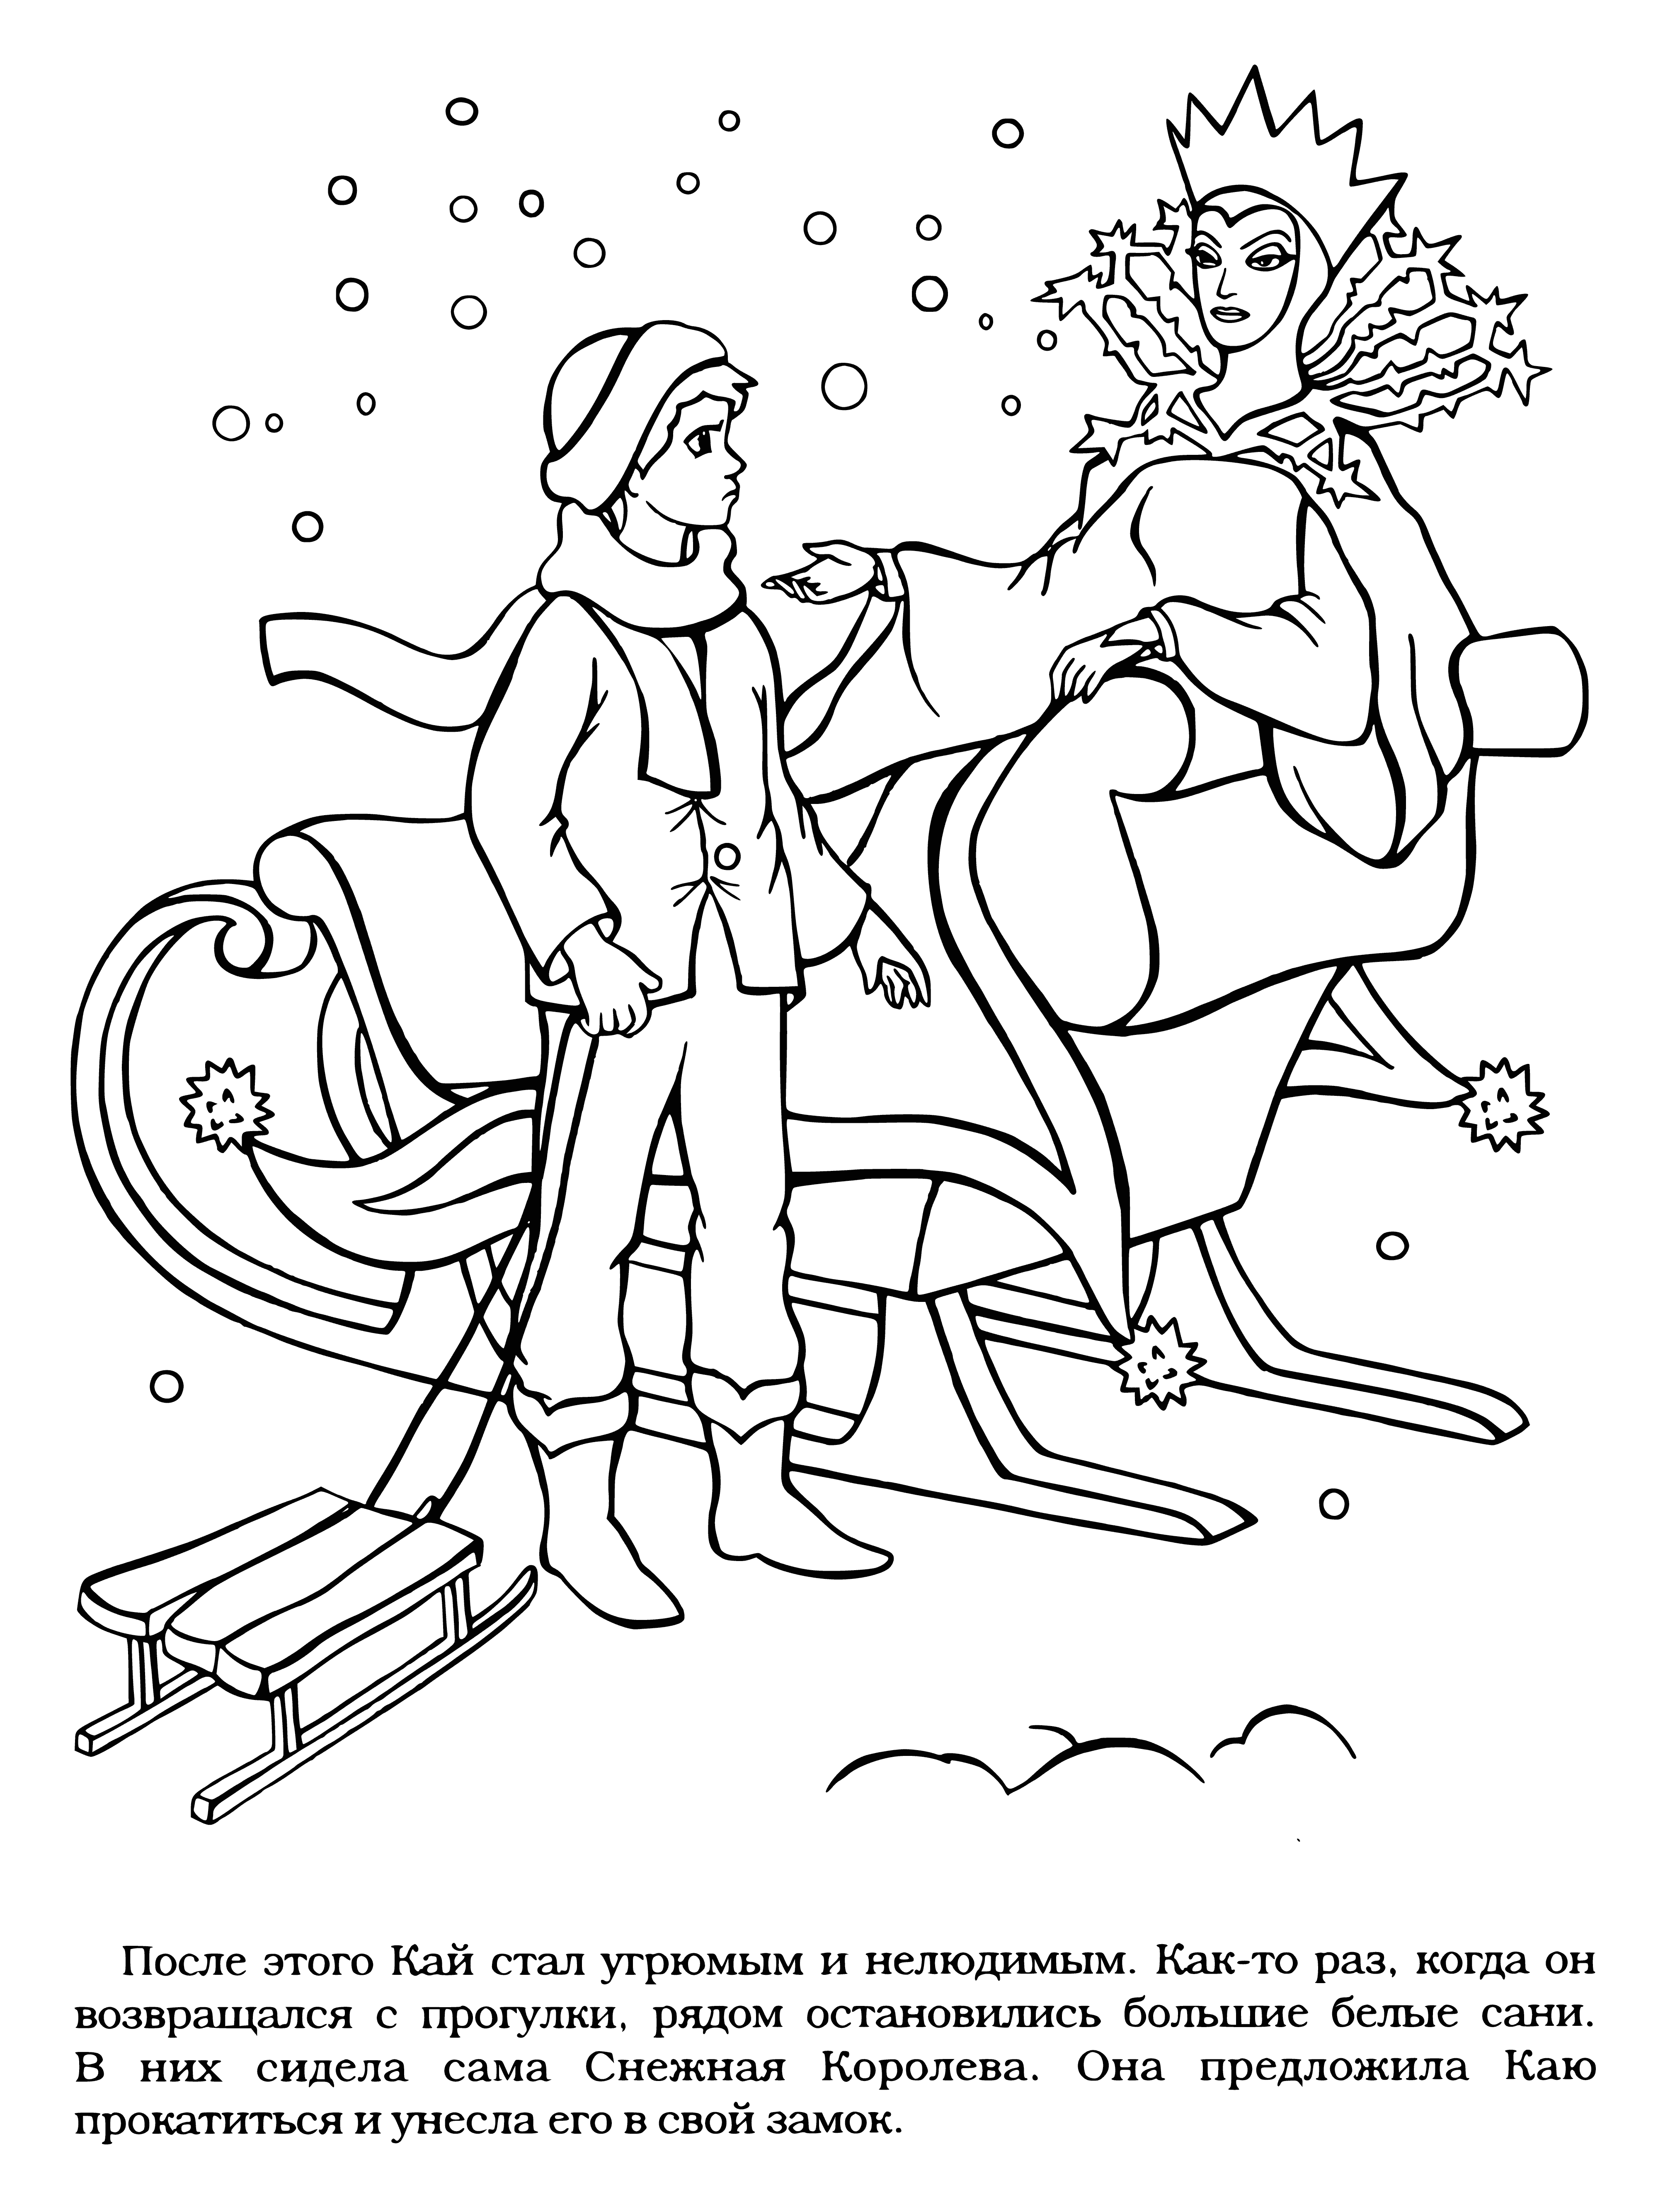 coloring page: Kai is whisked away by the Snow Queen in her sleigh, looking back with a scarf around his neck.